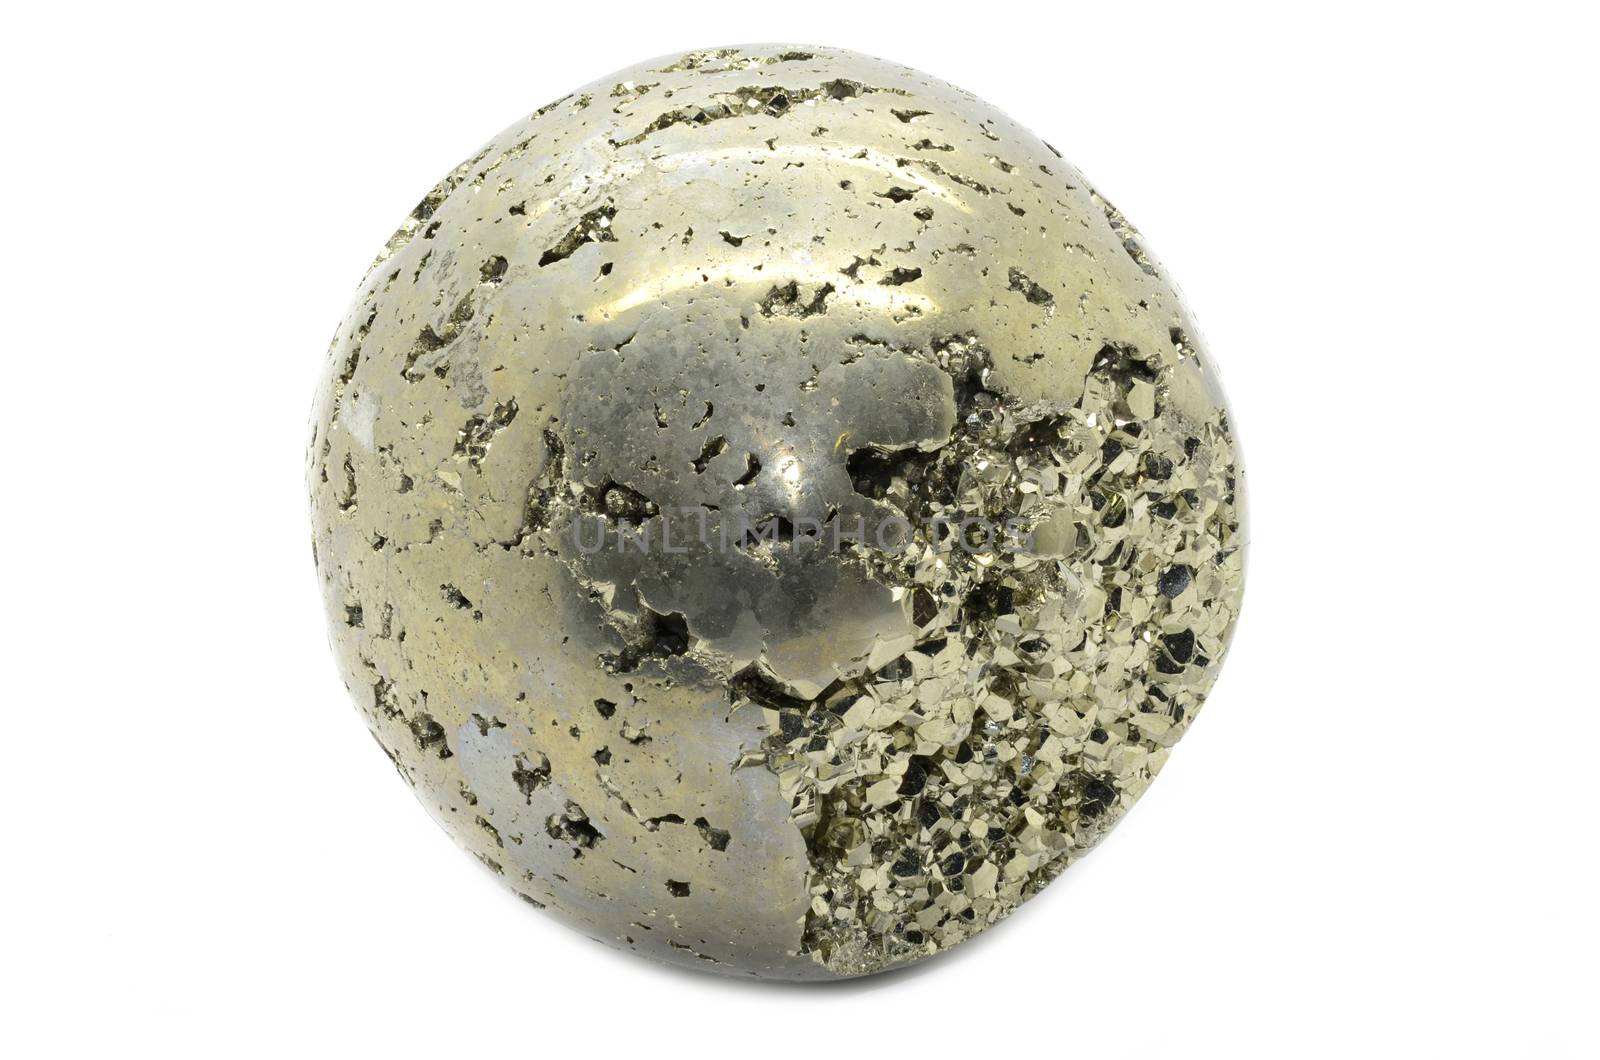 Sample of a beautiful Pyrite sphere isolated on white background